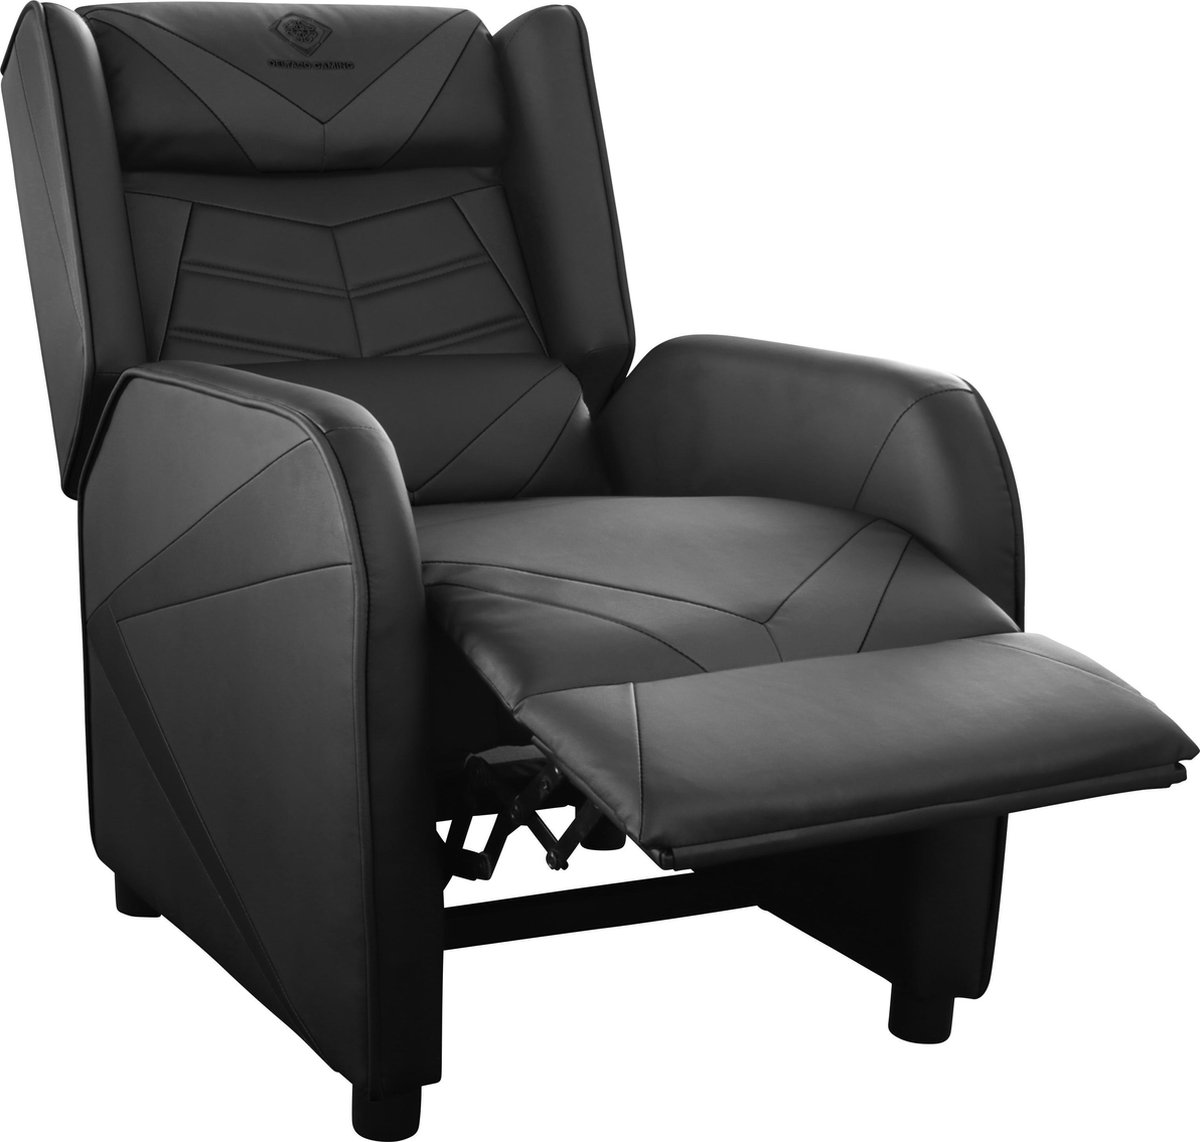 Deltaco Gaming DC420 Console Gaming Chair, Relax Chair and Recliner, PU Leather - Black